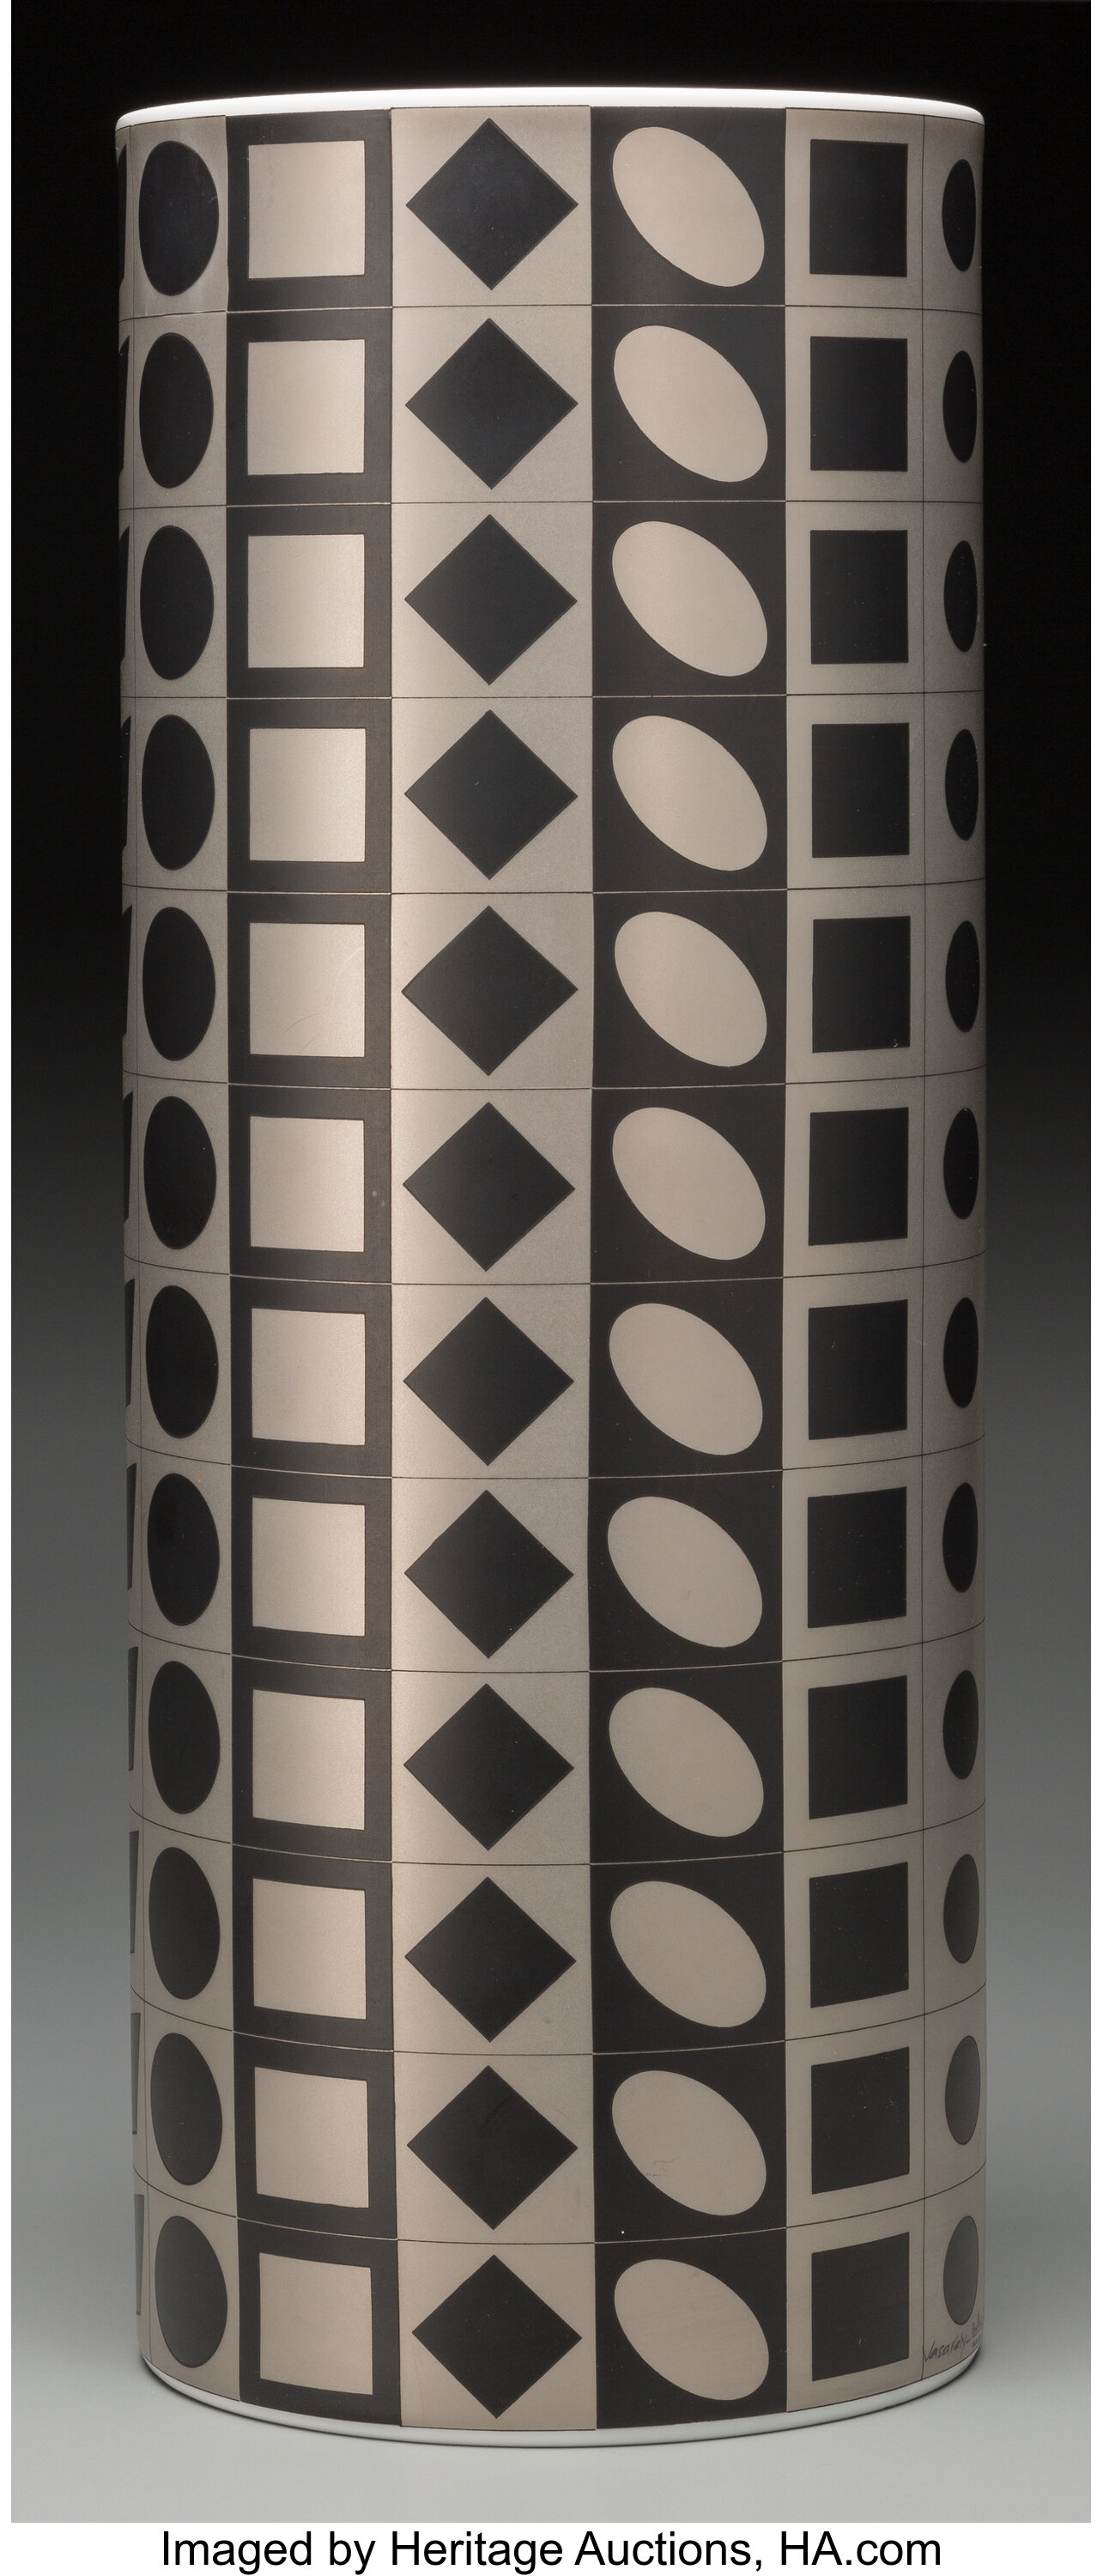 lindring vegne omgivet Victor Vasarely (French, 1906-1997). Geometric Vase, circa 1970, | Lot  #61109 | Heritage Auctions